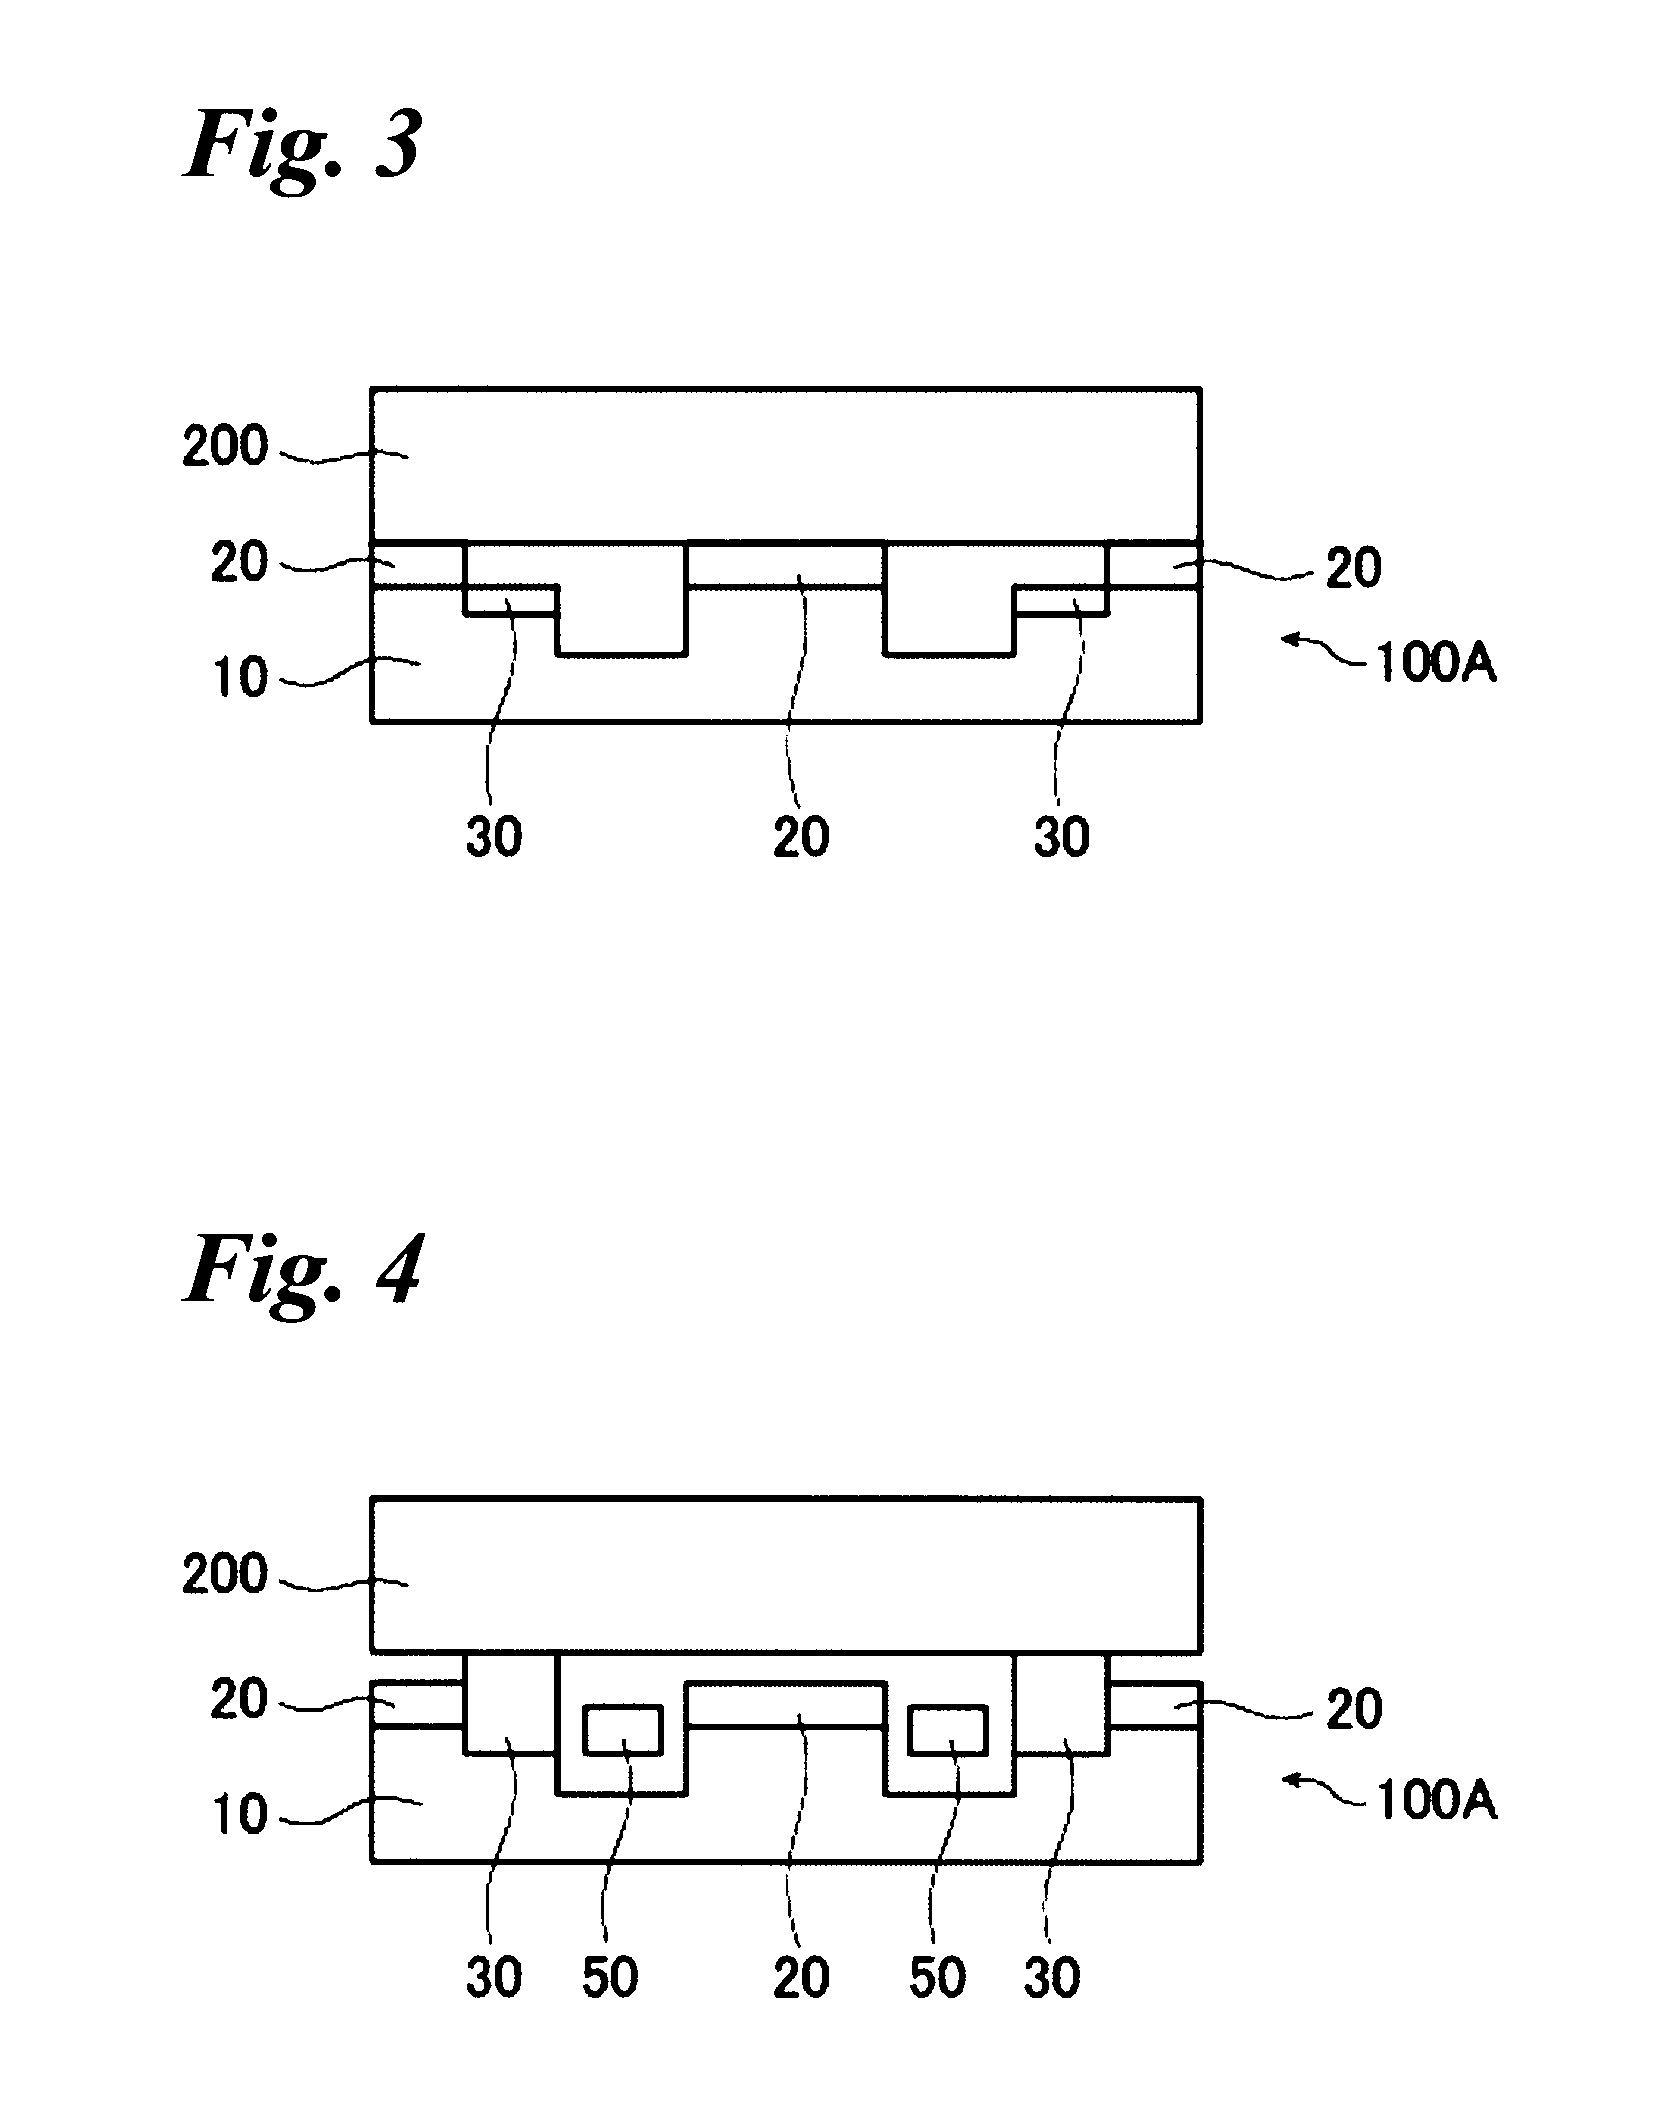 Glass substrate-holding tool